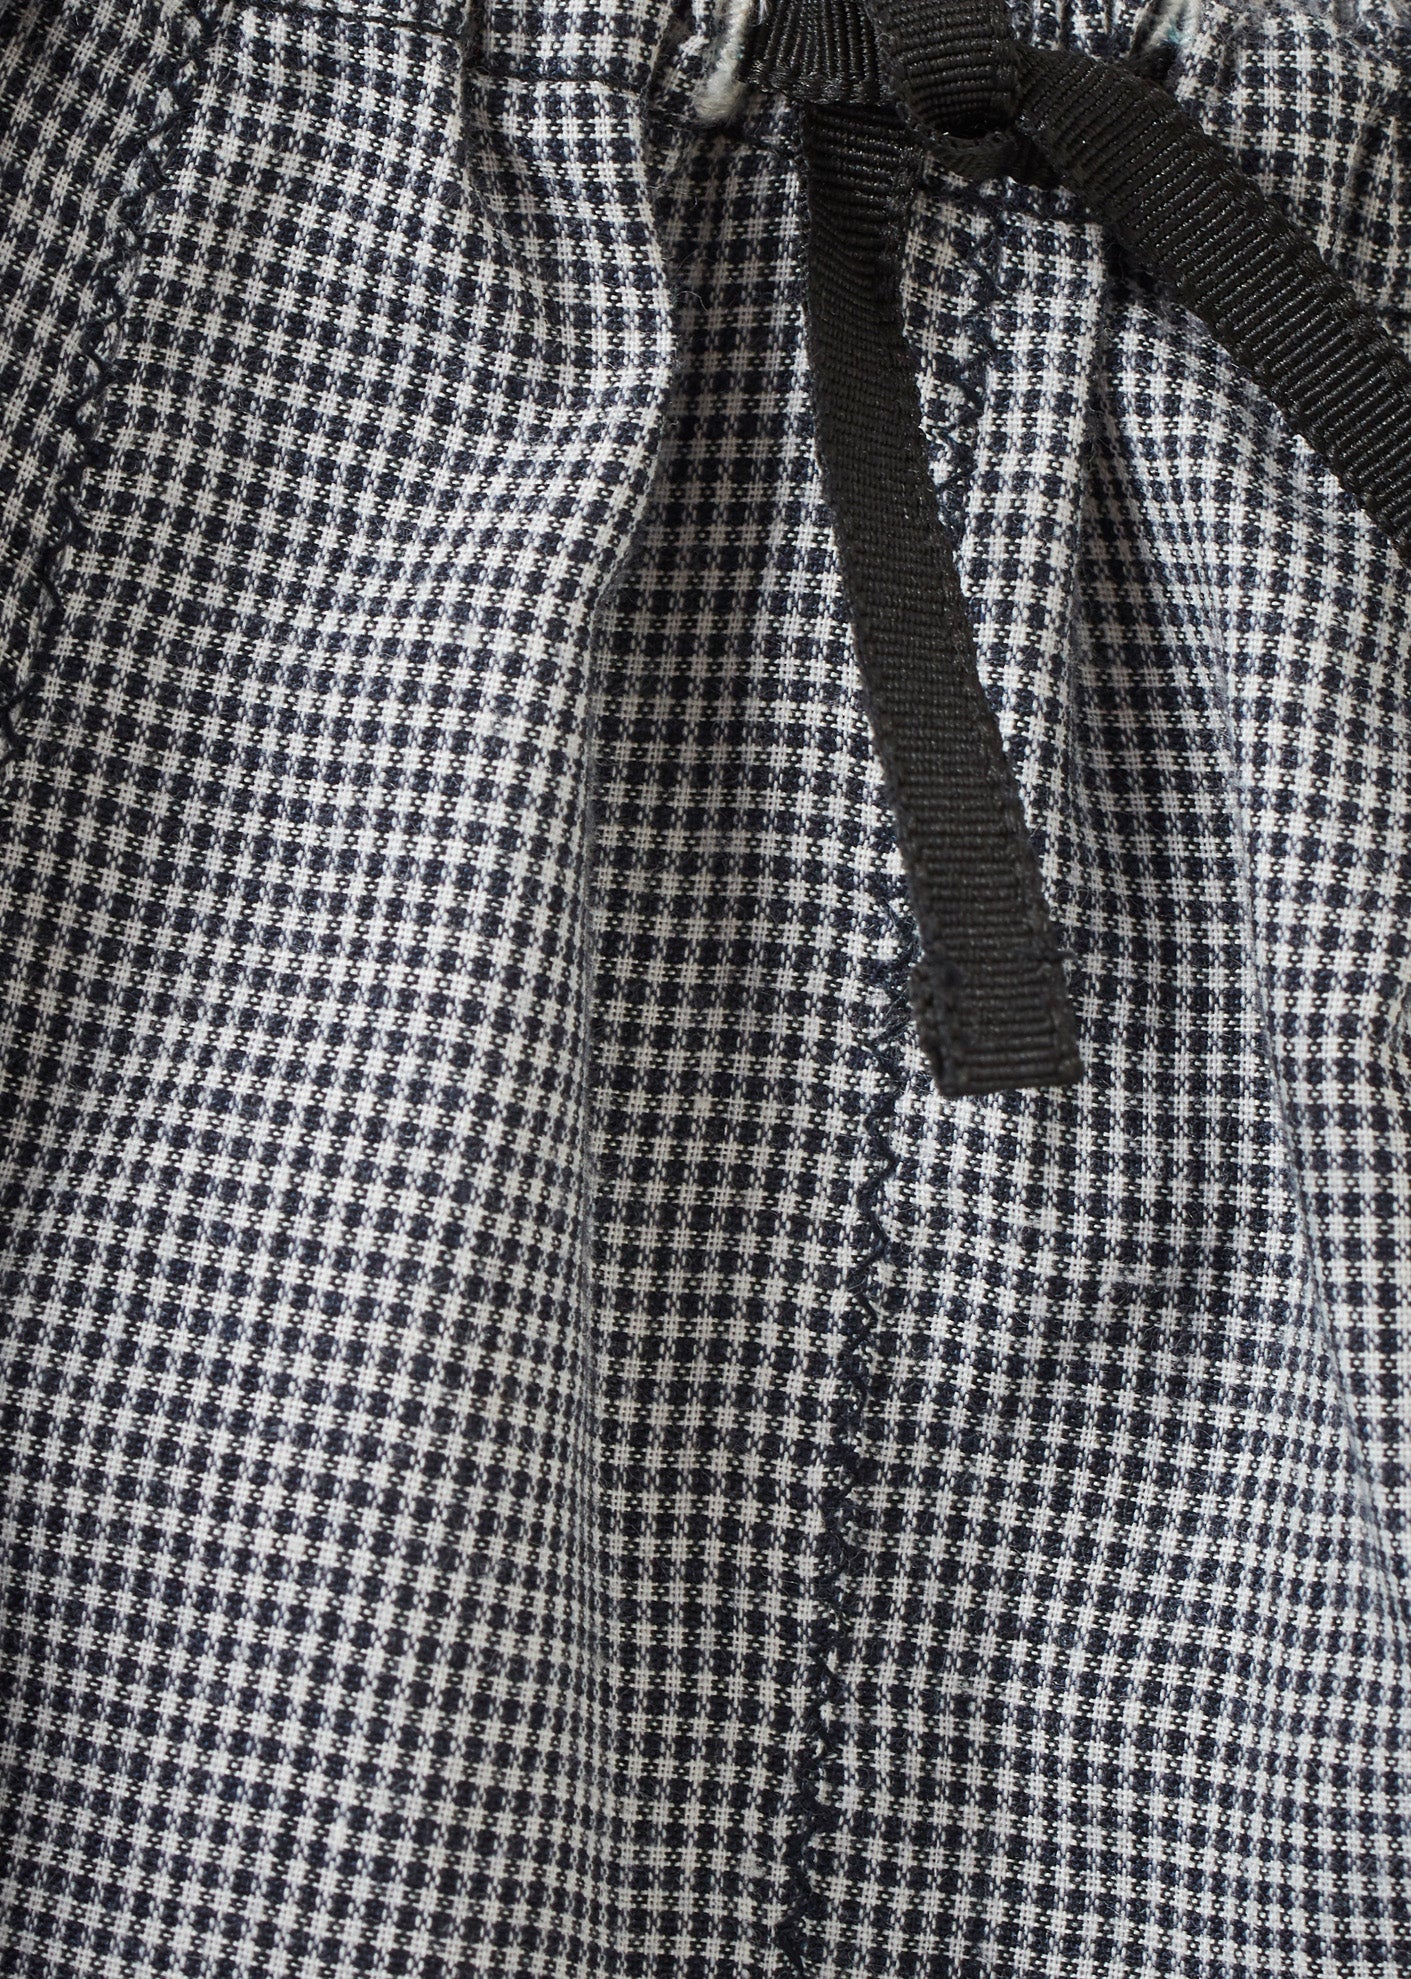 LINUM BABY TROUSERS - BLACK MICRO CHECK